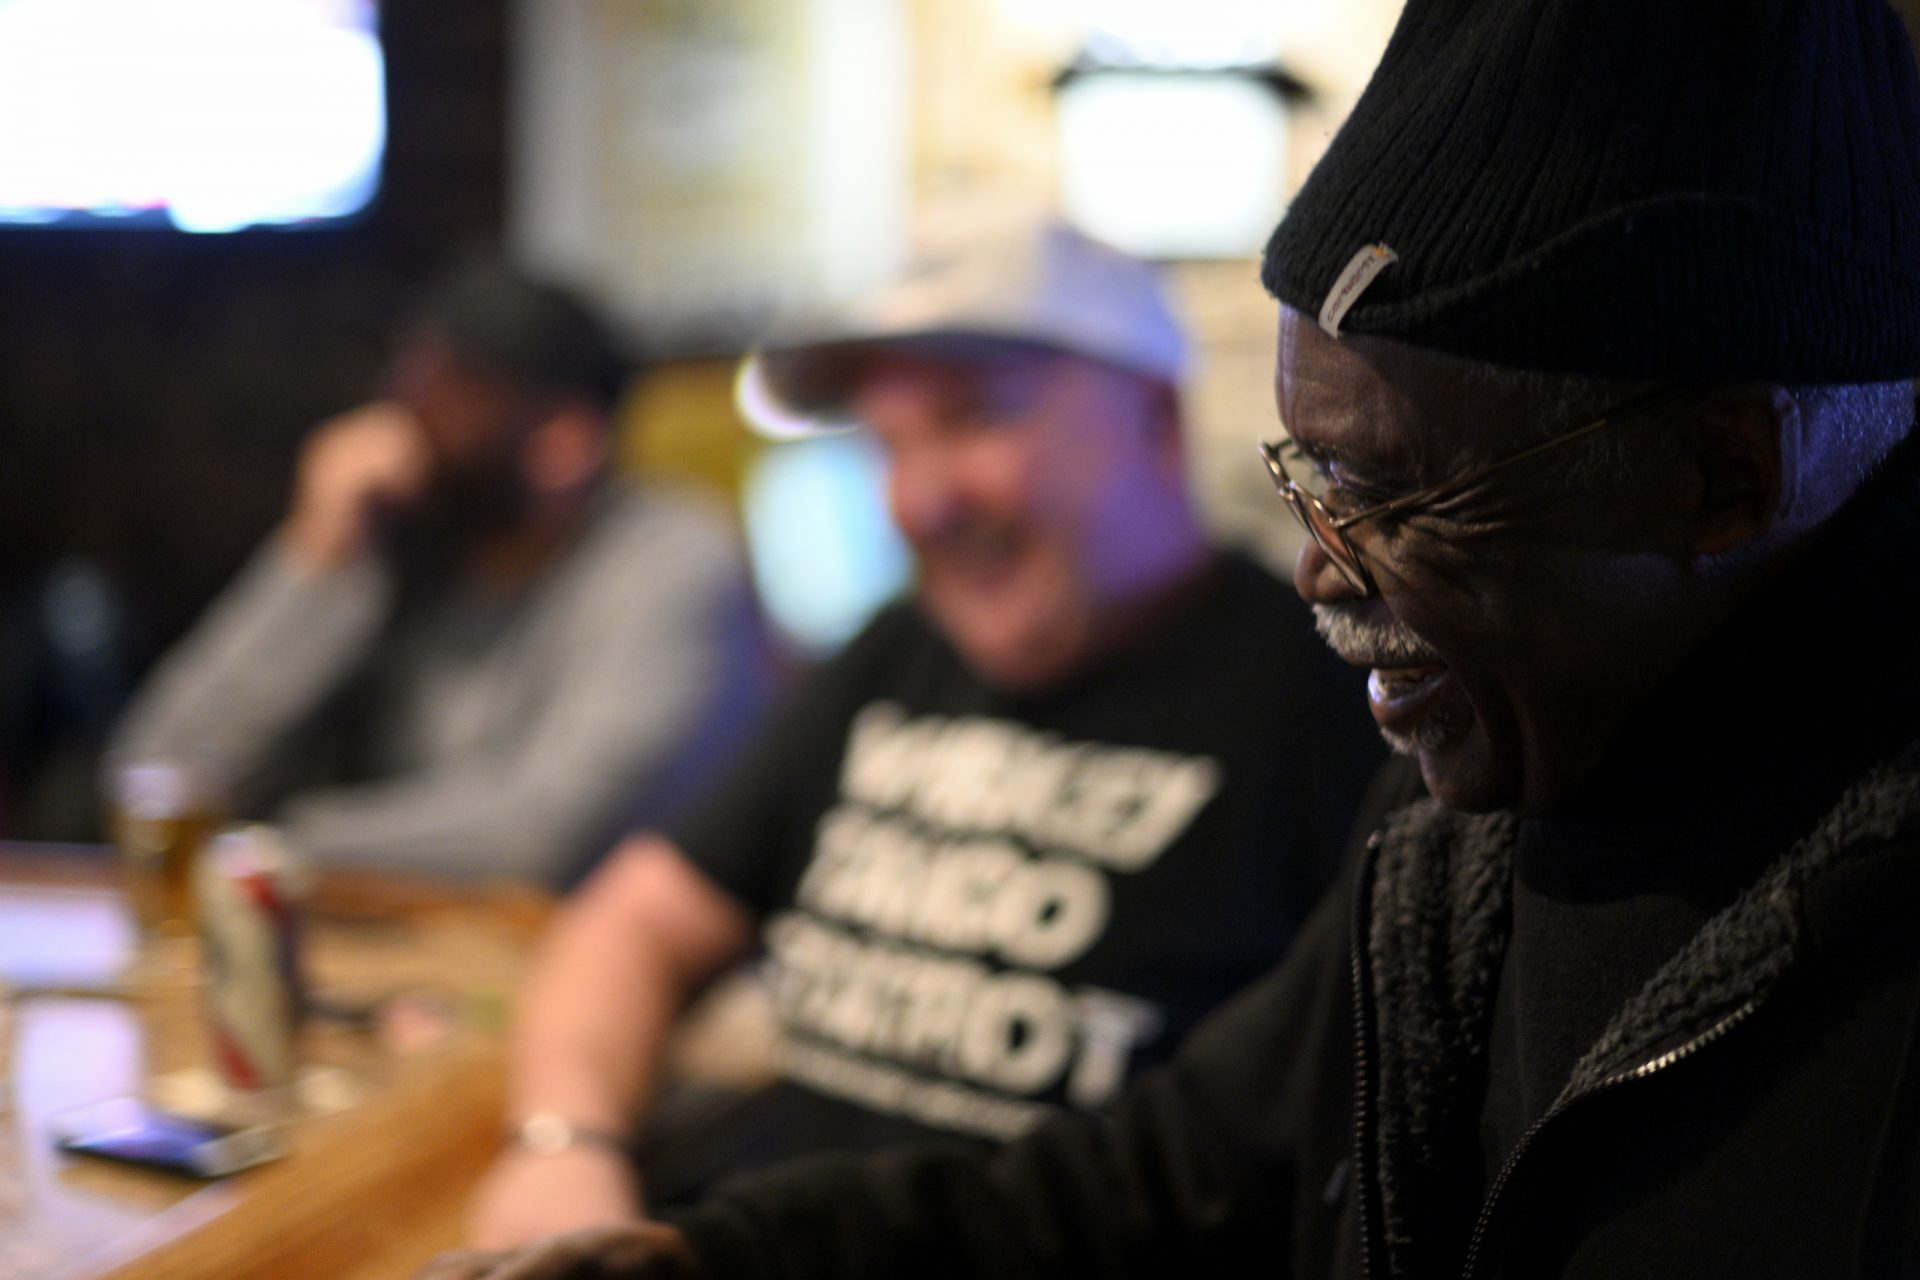 Ronald Stanley Webb, Andy and Stosh's dad, sits at the bar at Deer Lake & West Brunswick Fire Company No. 1, the first place he and his wife felt accepted as a couple in Schuylkill after marrying in the 1960s.